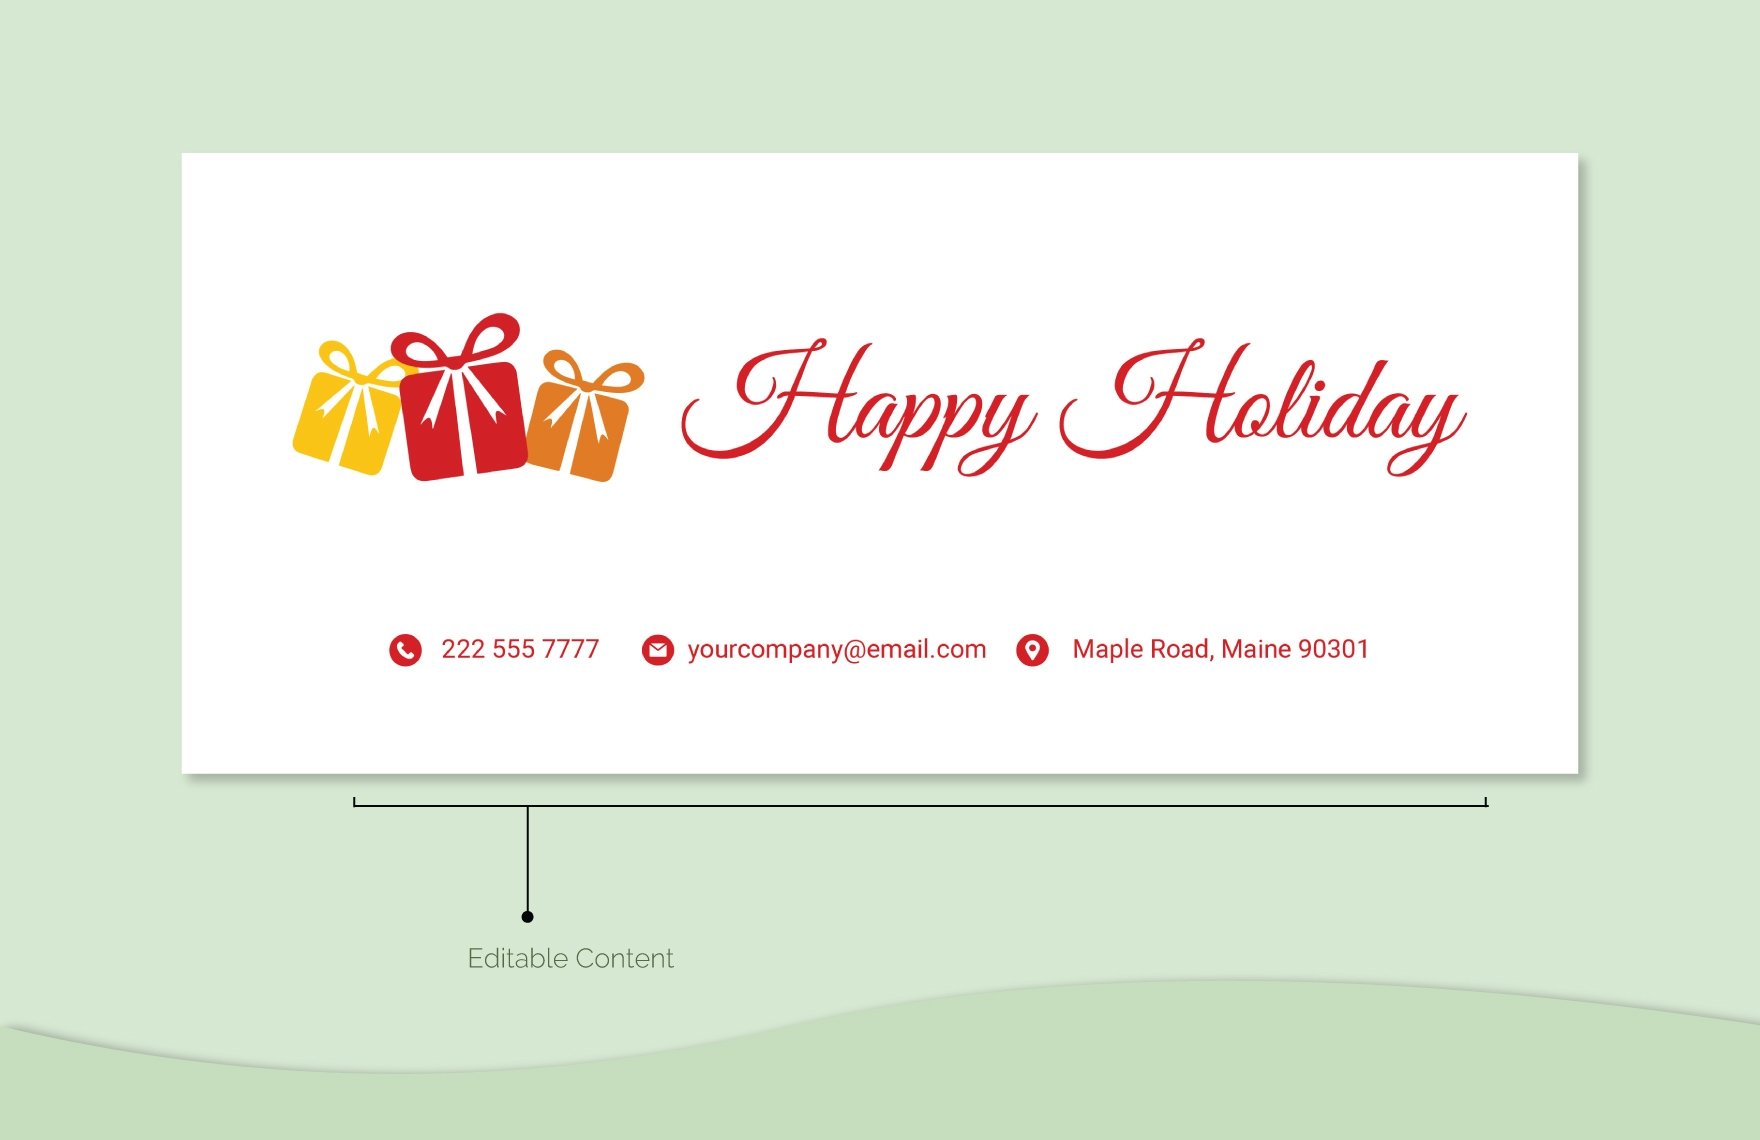 Holiday Envelope Template